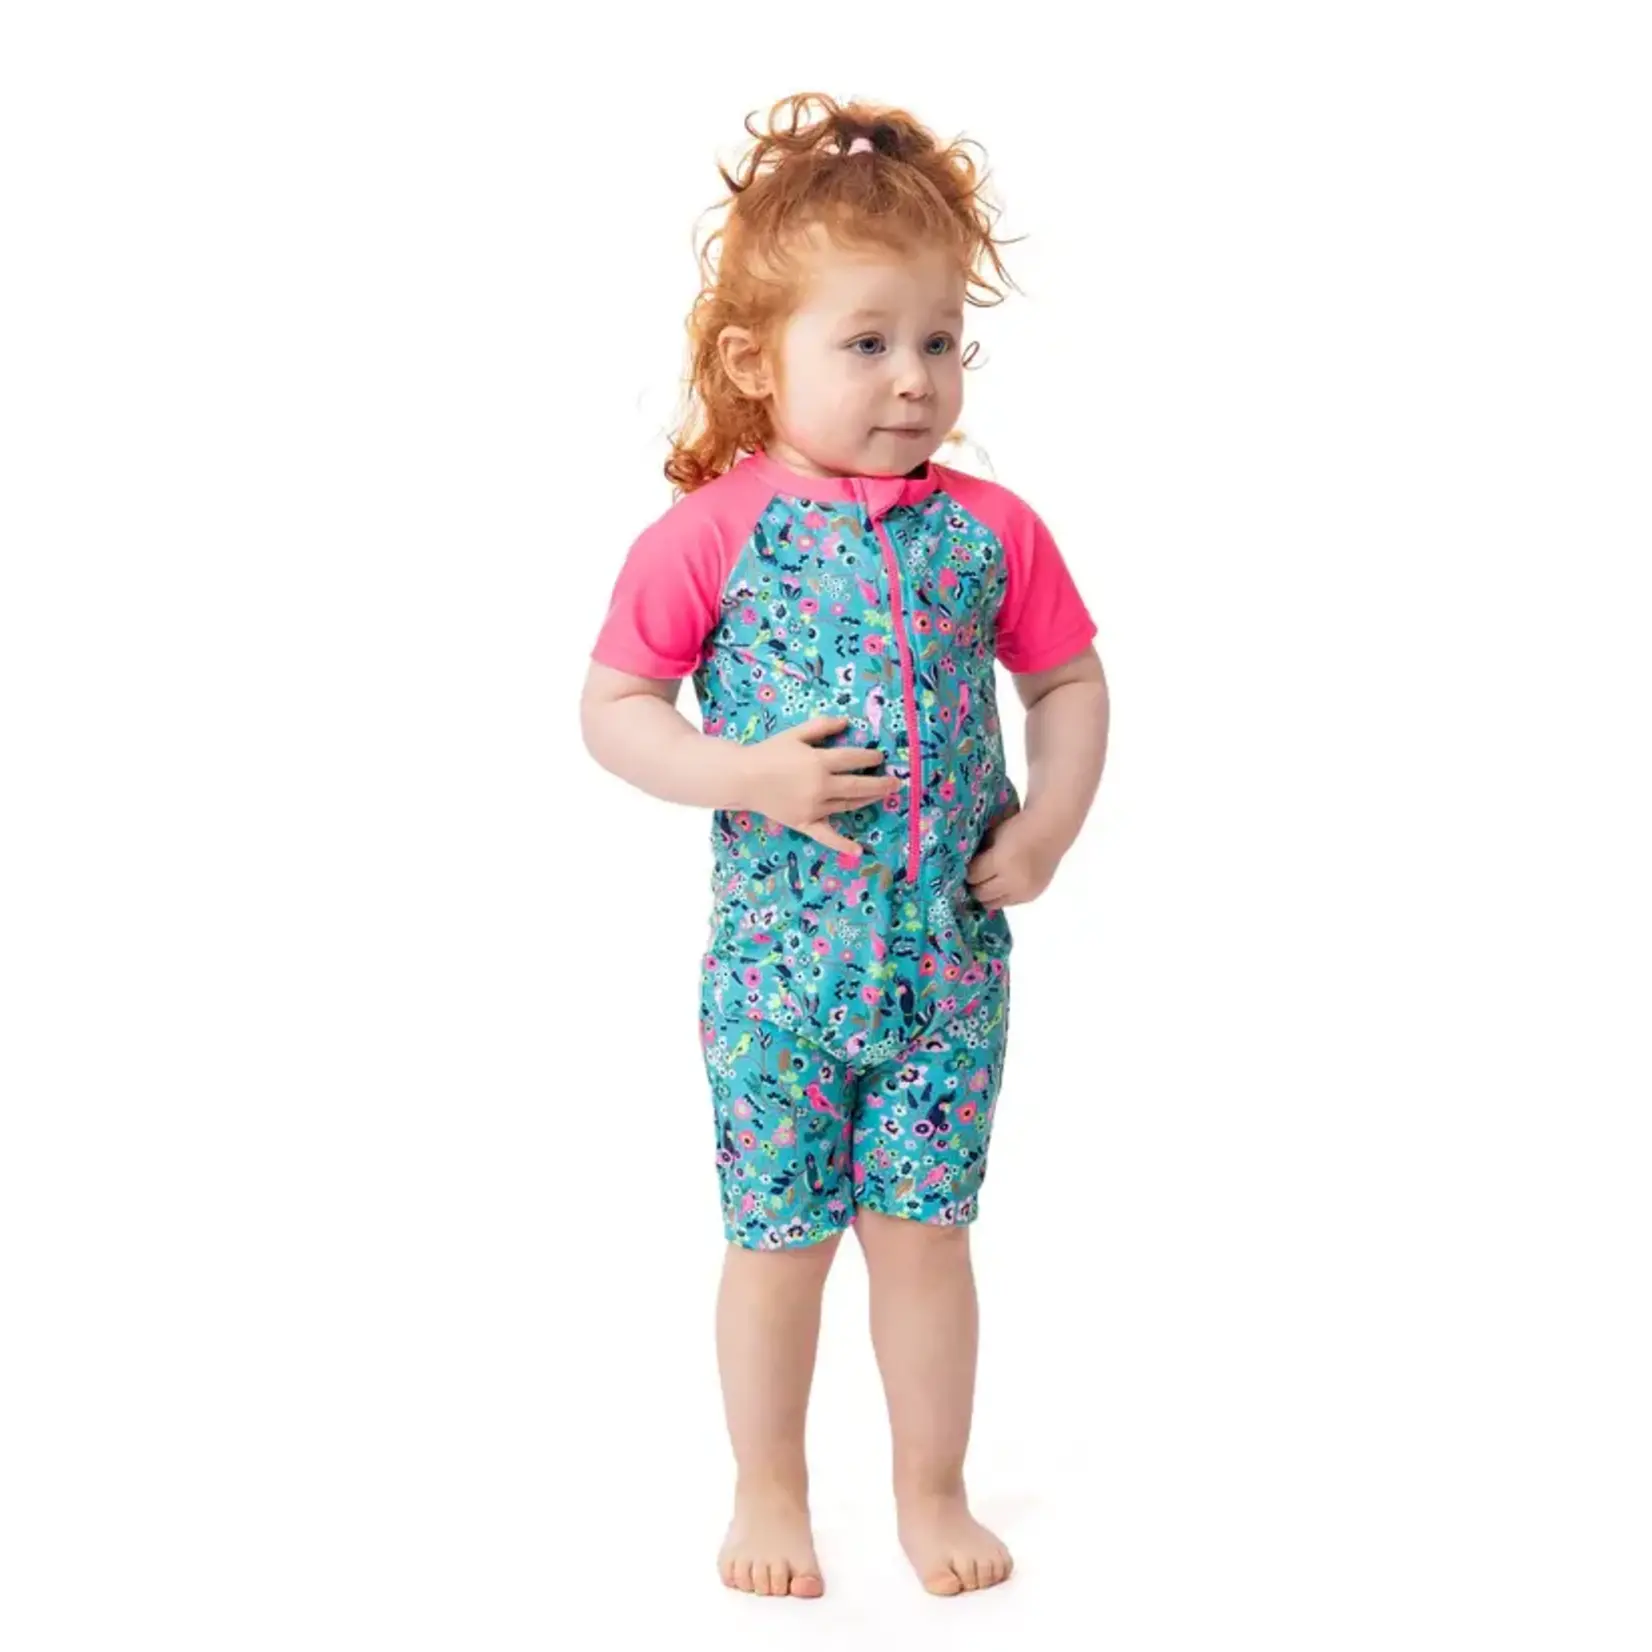 Nanö NANÖ - One-piece turquoise Rashguard Swimsuit with short Pink Sleeves and Flower Print